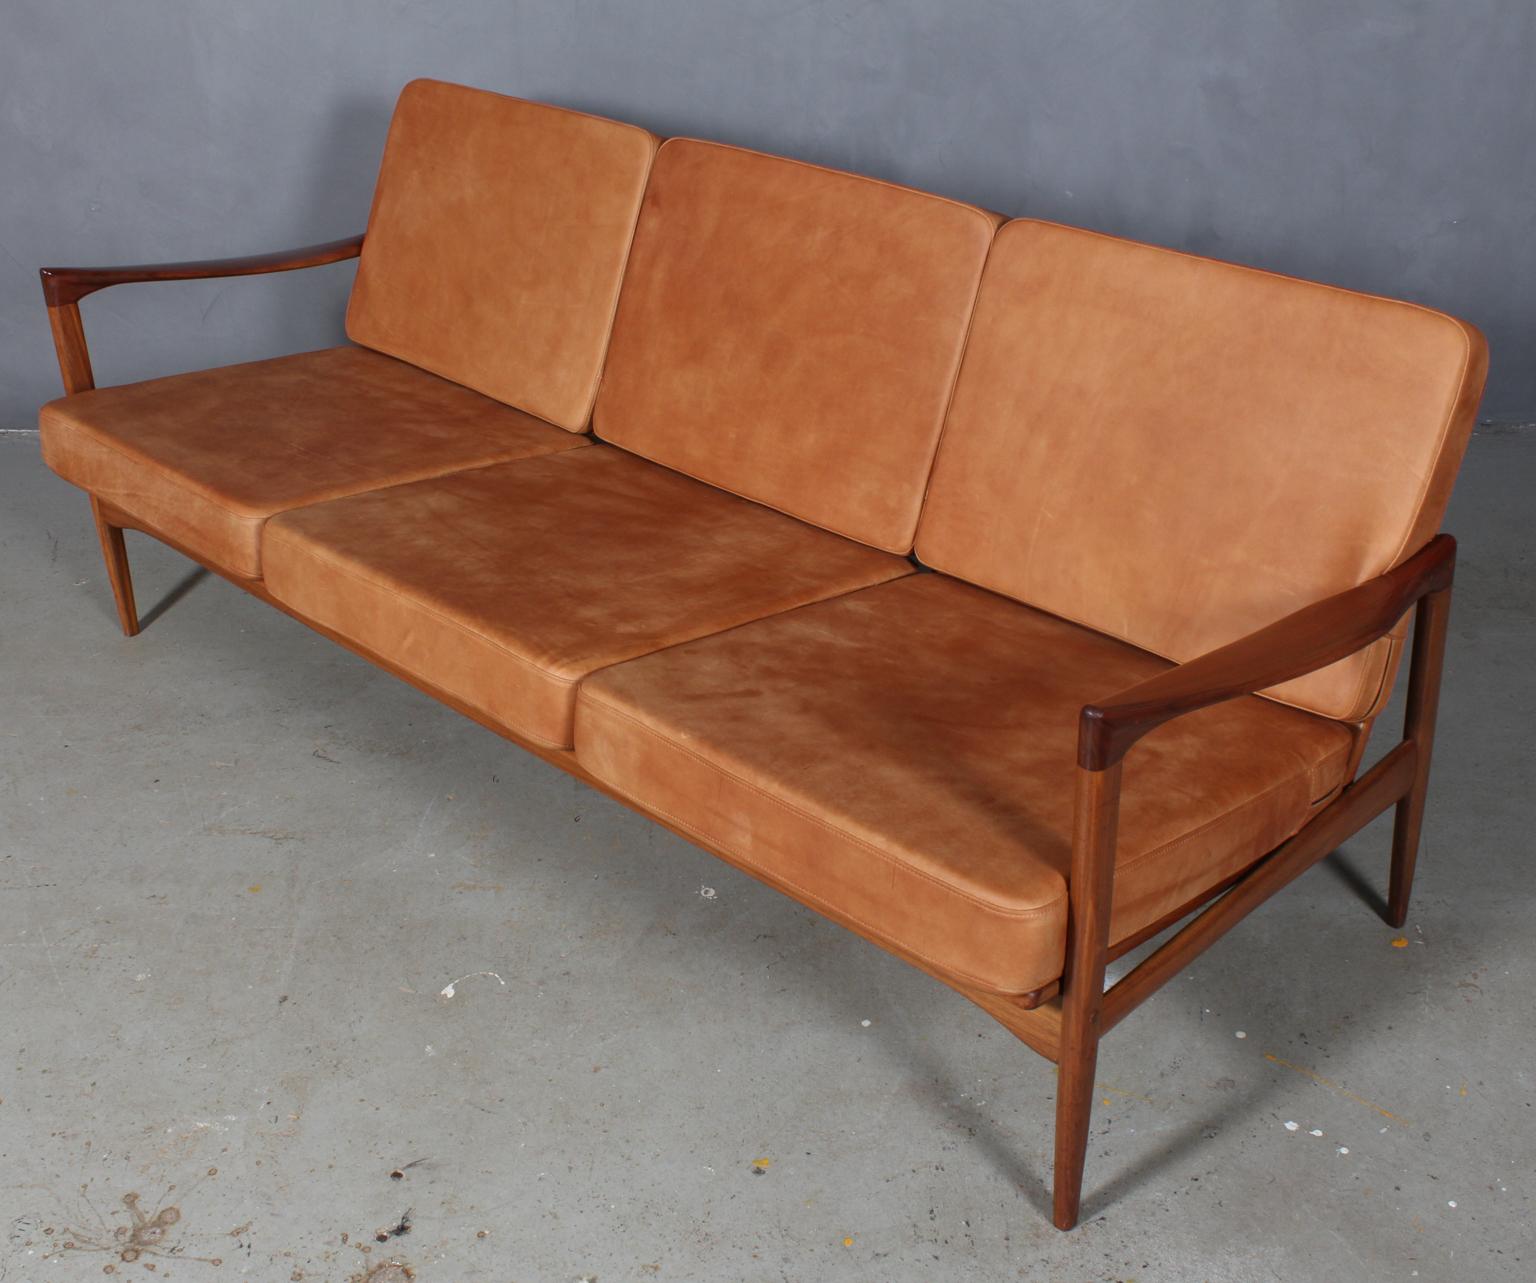 Ib Kofod-Larsen three-seat sofa with frame of walnut.

New upholstered cushions in vintage tan aniline leather.

Model Kandidaten, made by Ope.
 